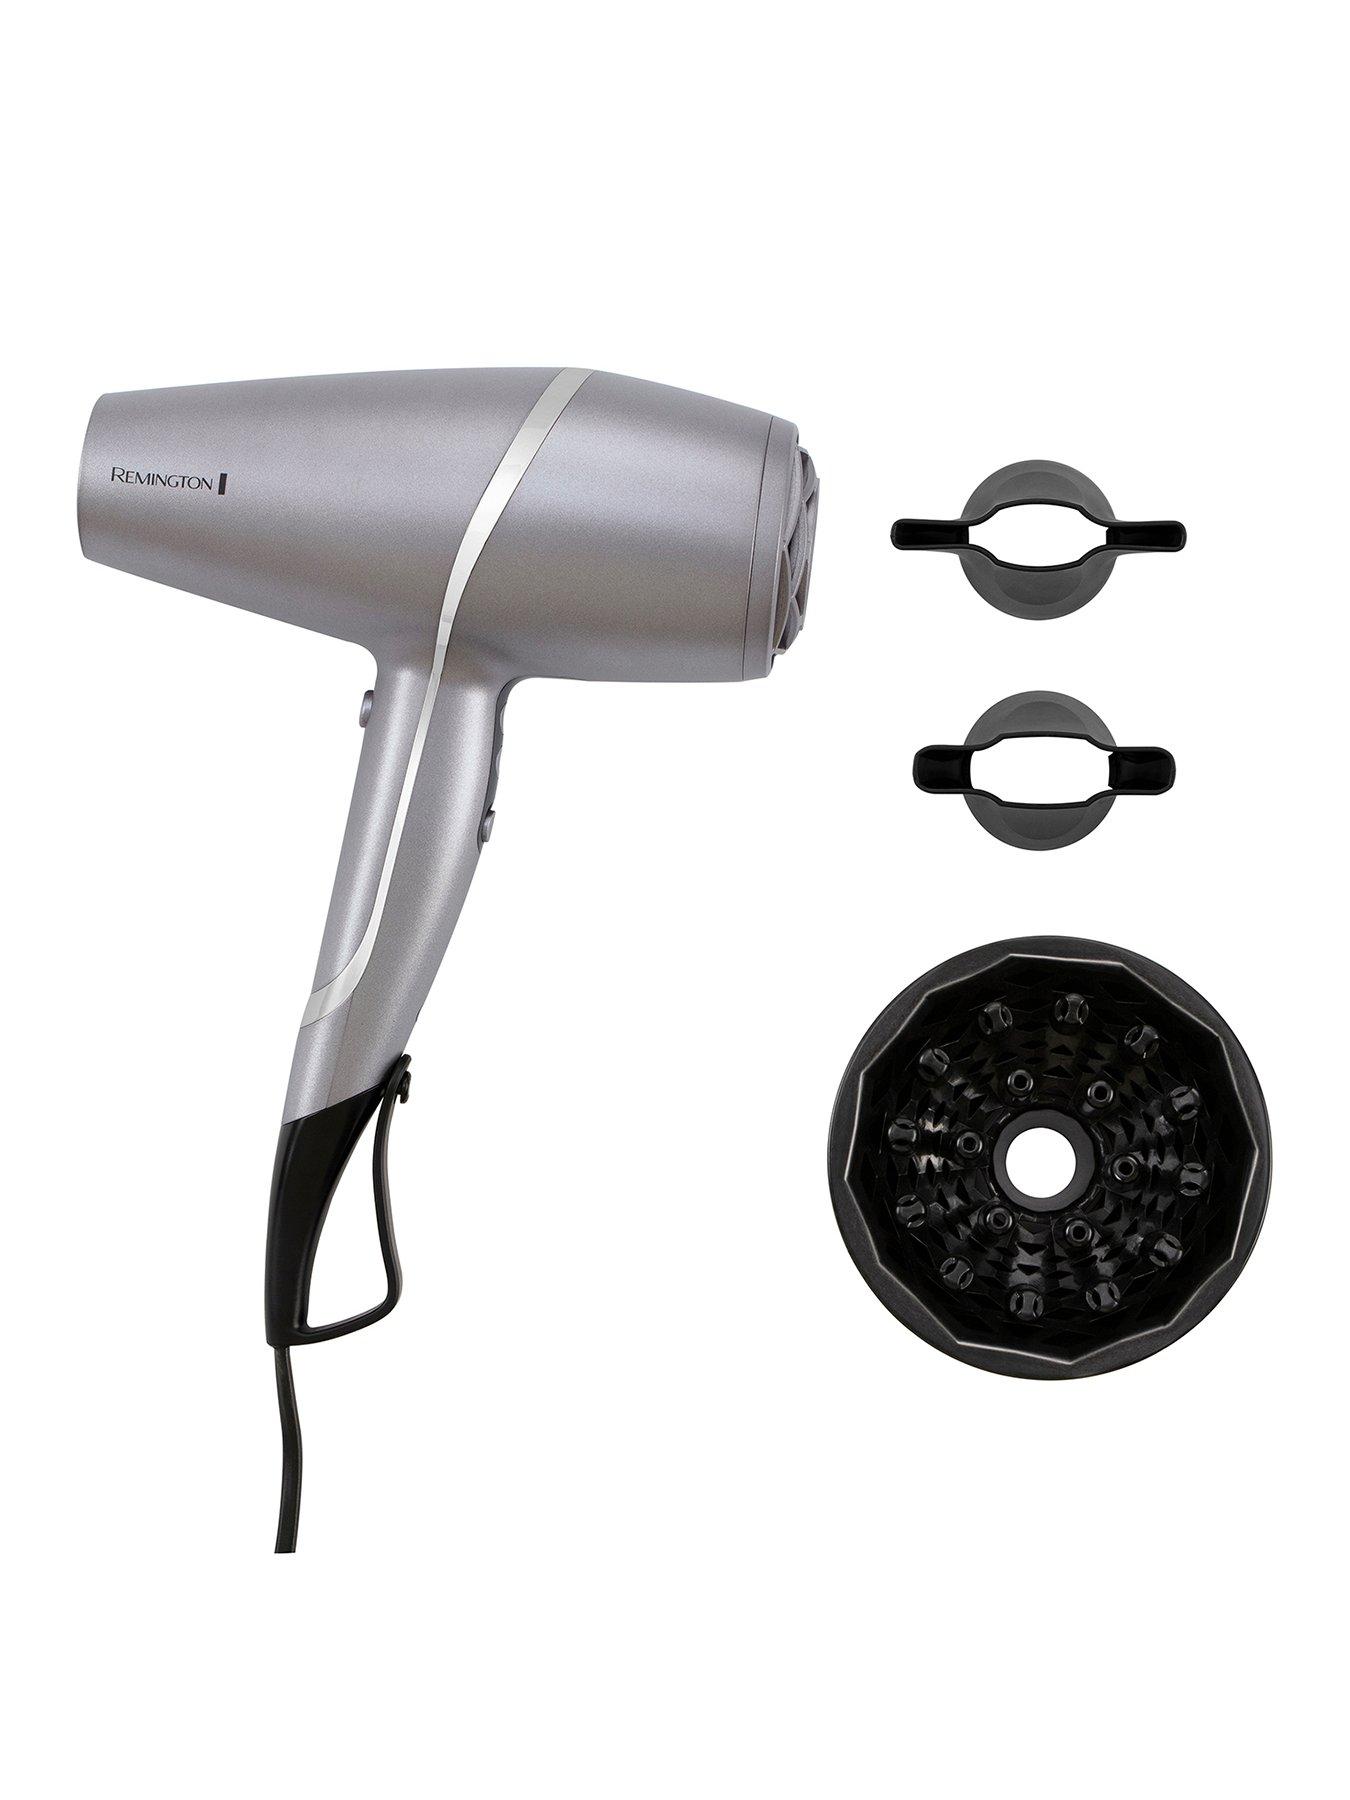 Remington PROluxe Hair Dryer Review - Beauty Review